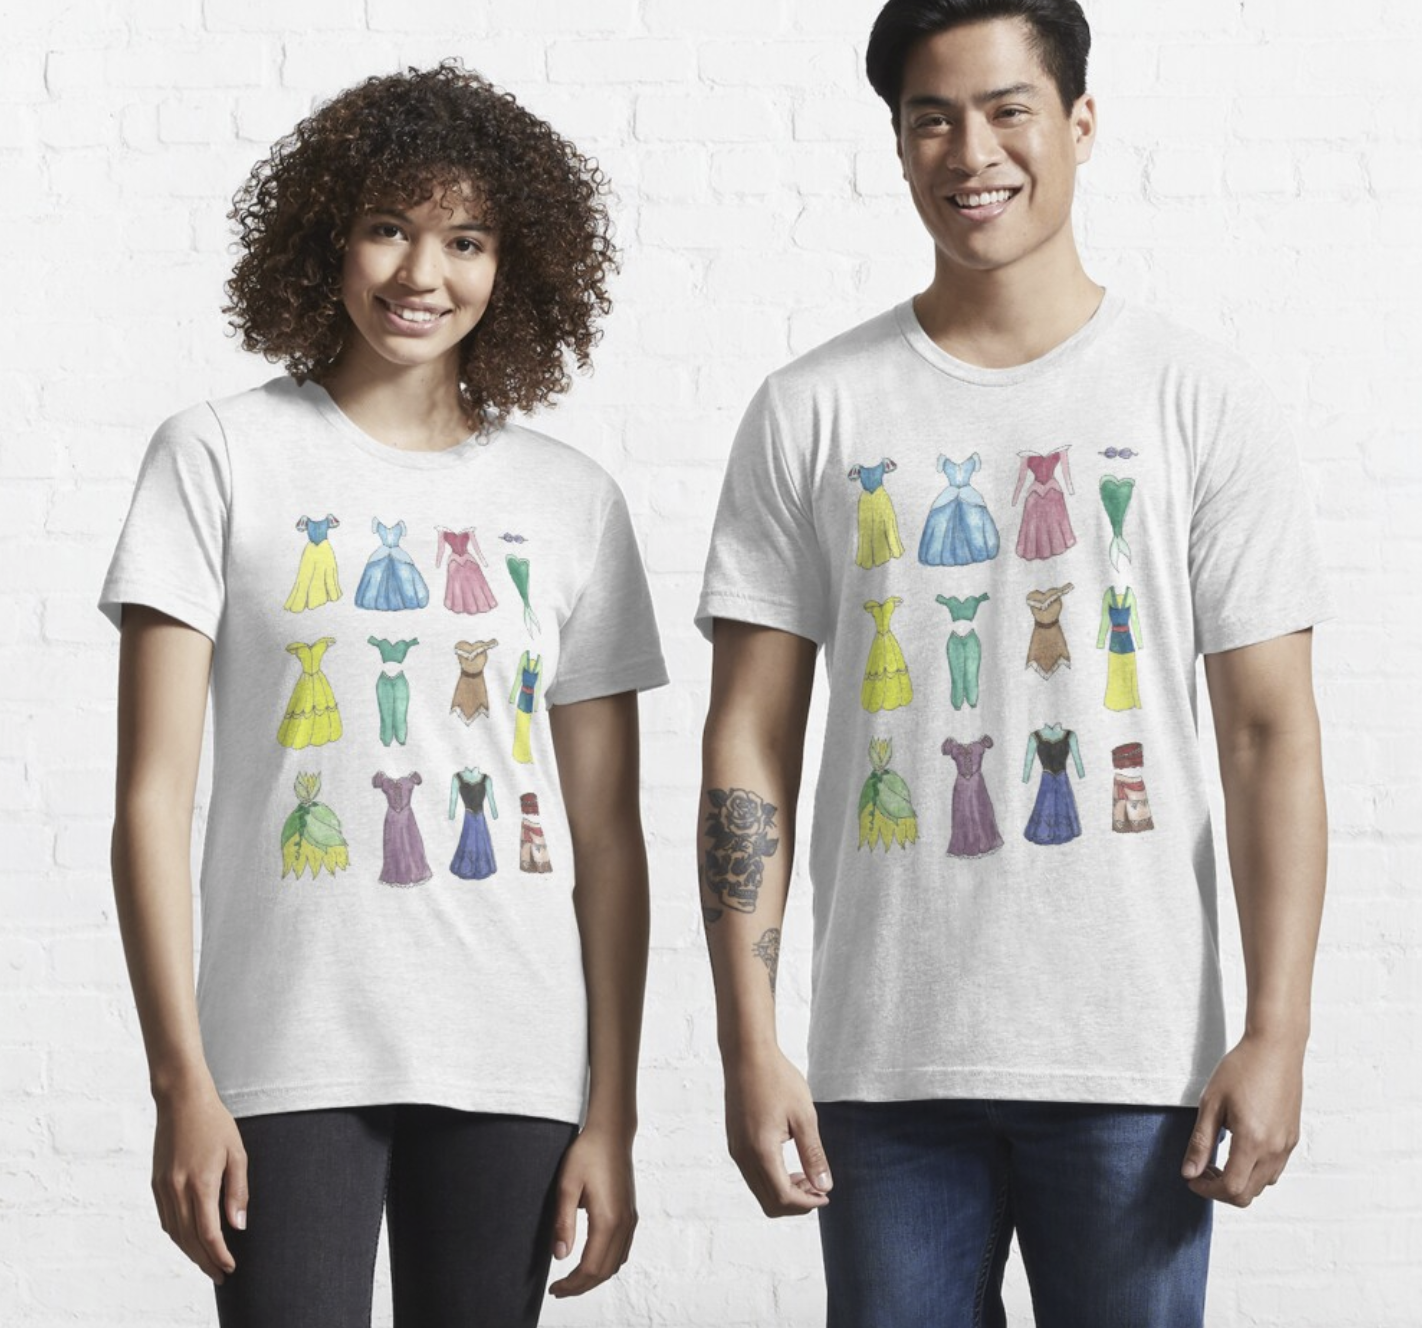 two models wearing the t-shirt